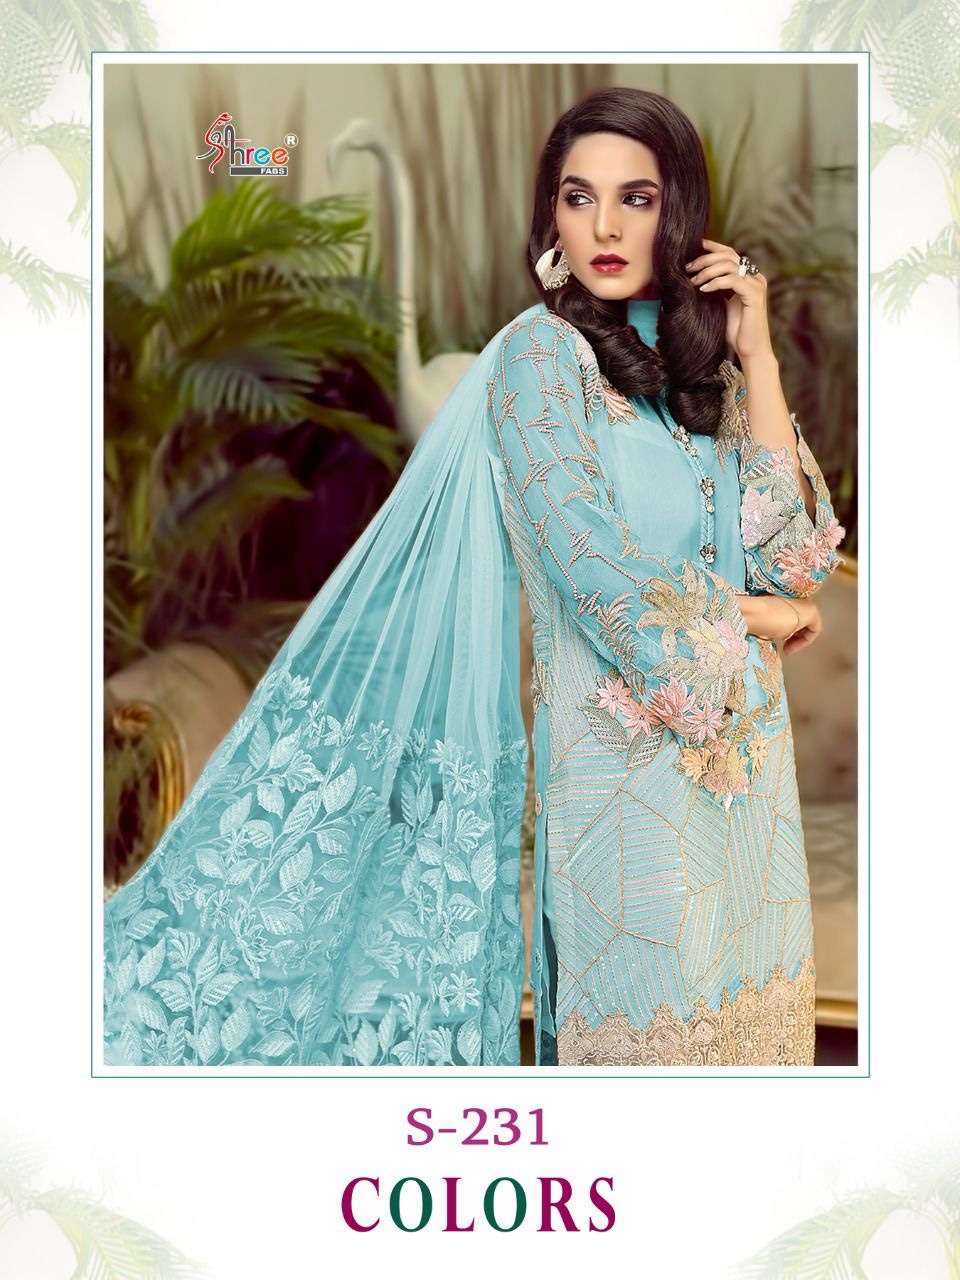 Shree fabs s 231 colors georgette with embroidery work pakistani dress material at wholesale Rate 